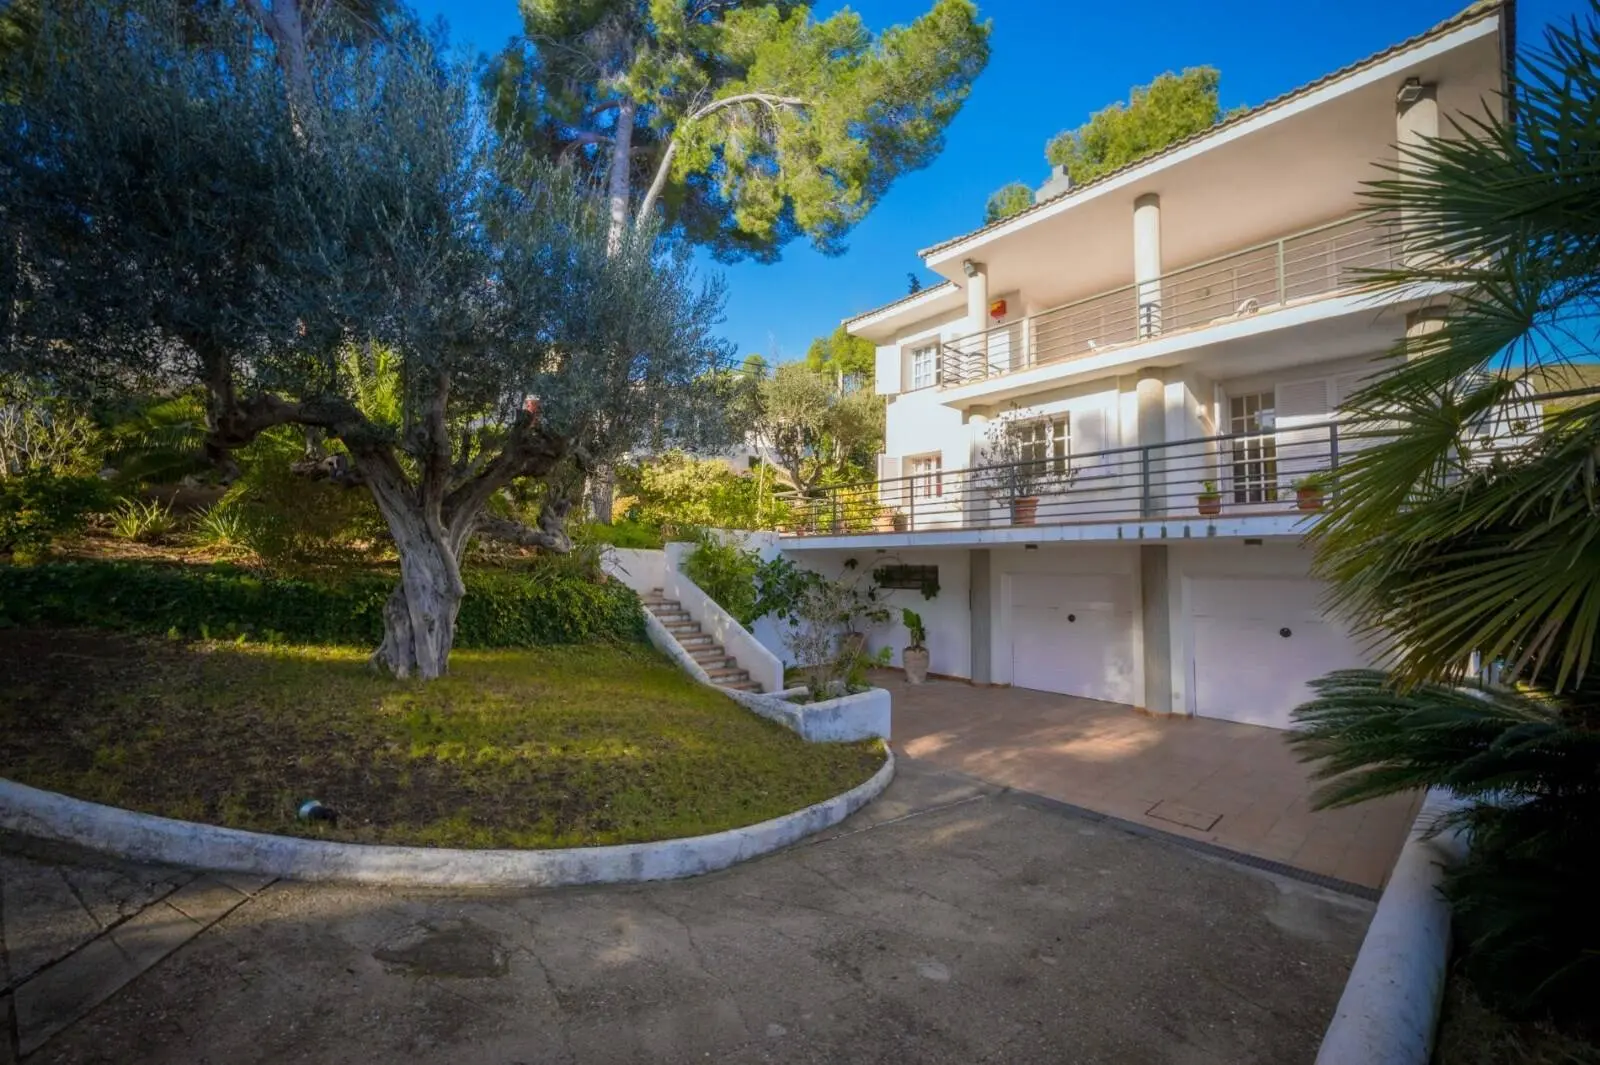 House for sale with a swimming pool in Castelldefels, Barcelona. 30